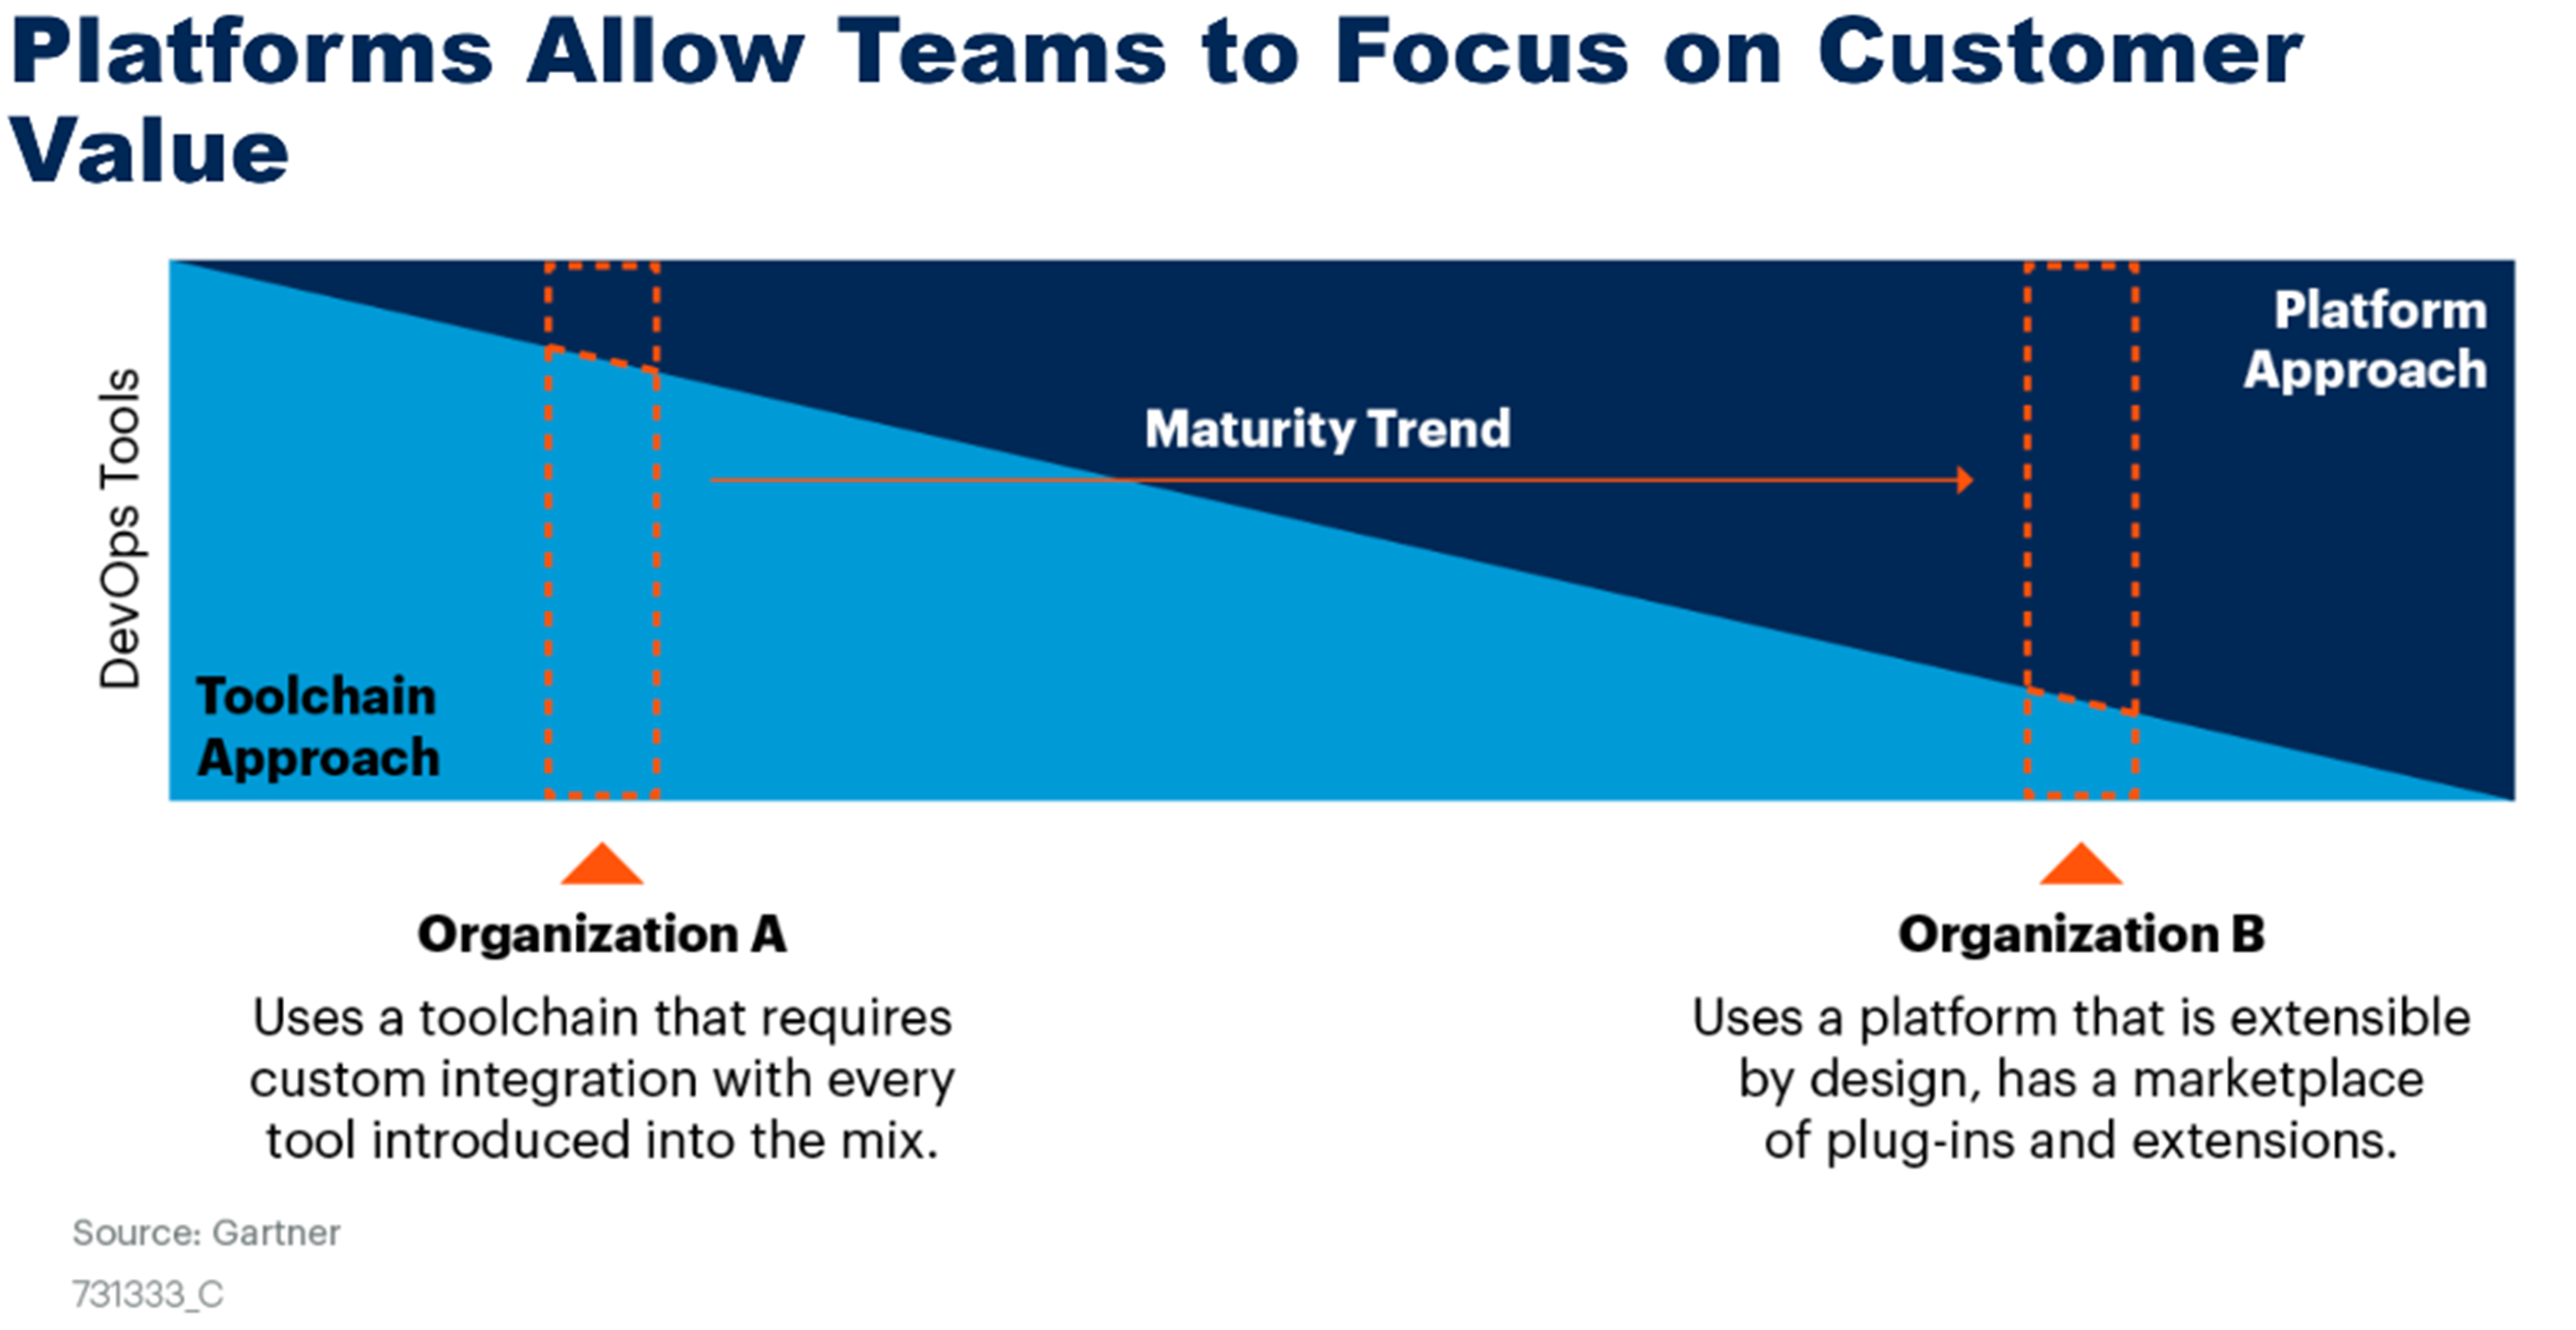 Platforms allow teams to focus on Customer Value